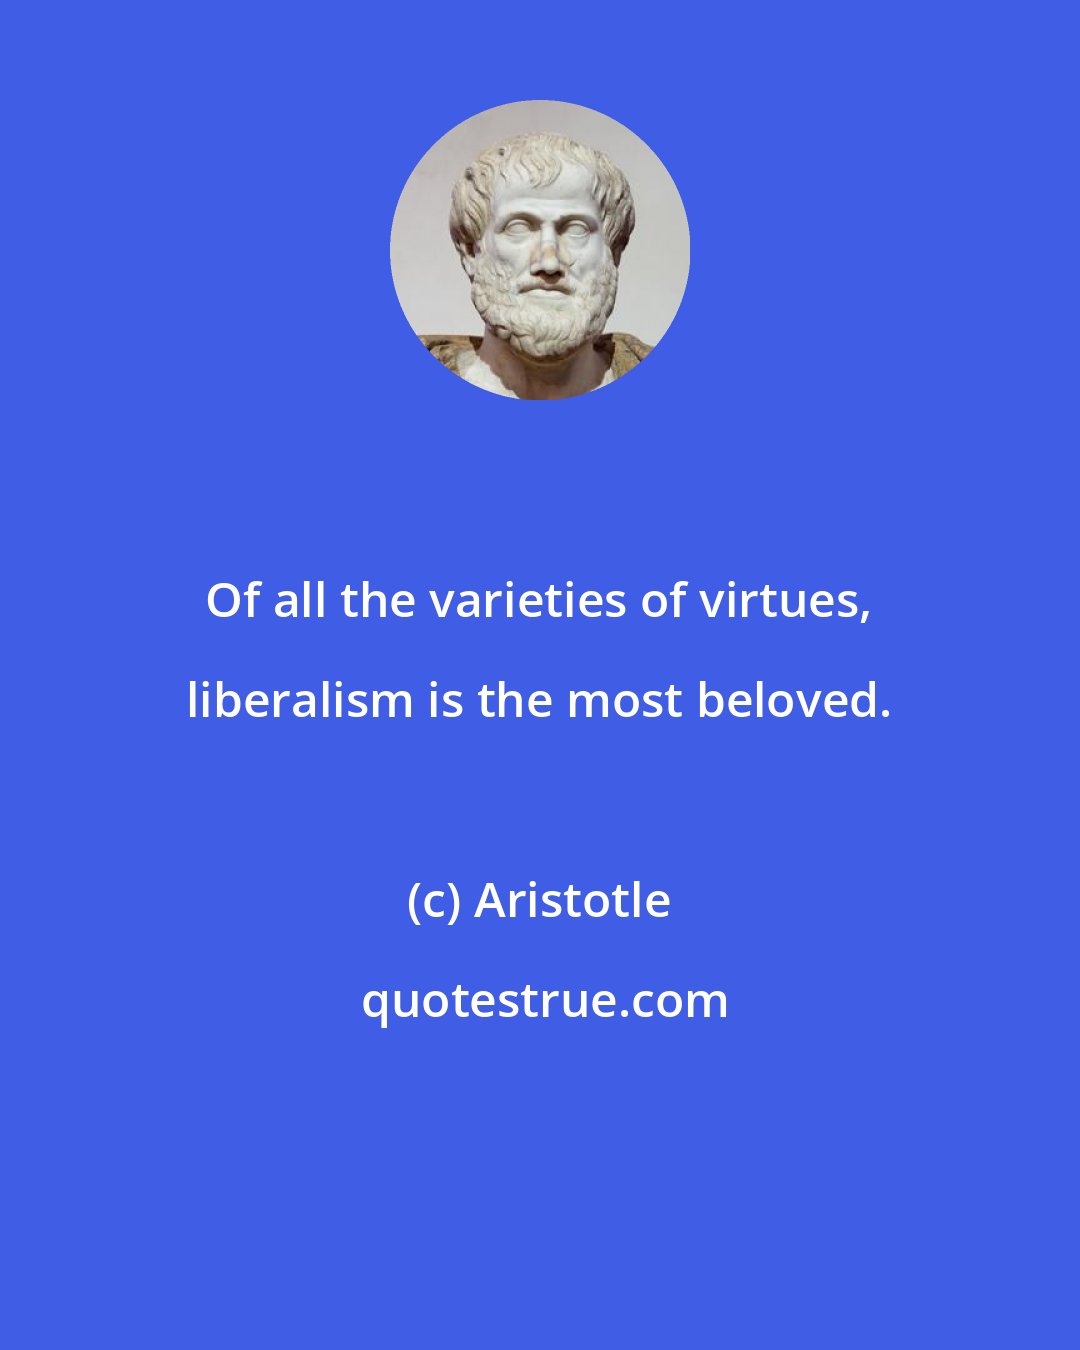 Aristotle: Of all the varieties of virtues, liberalism is the most beloved.